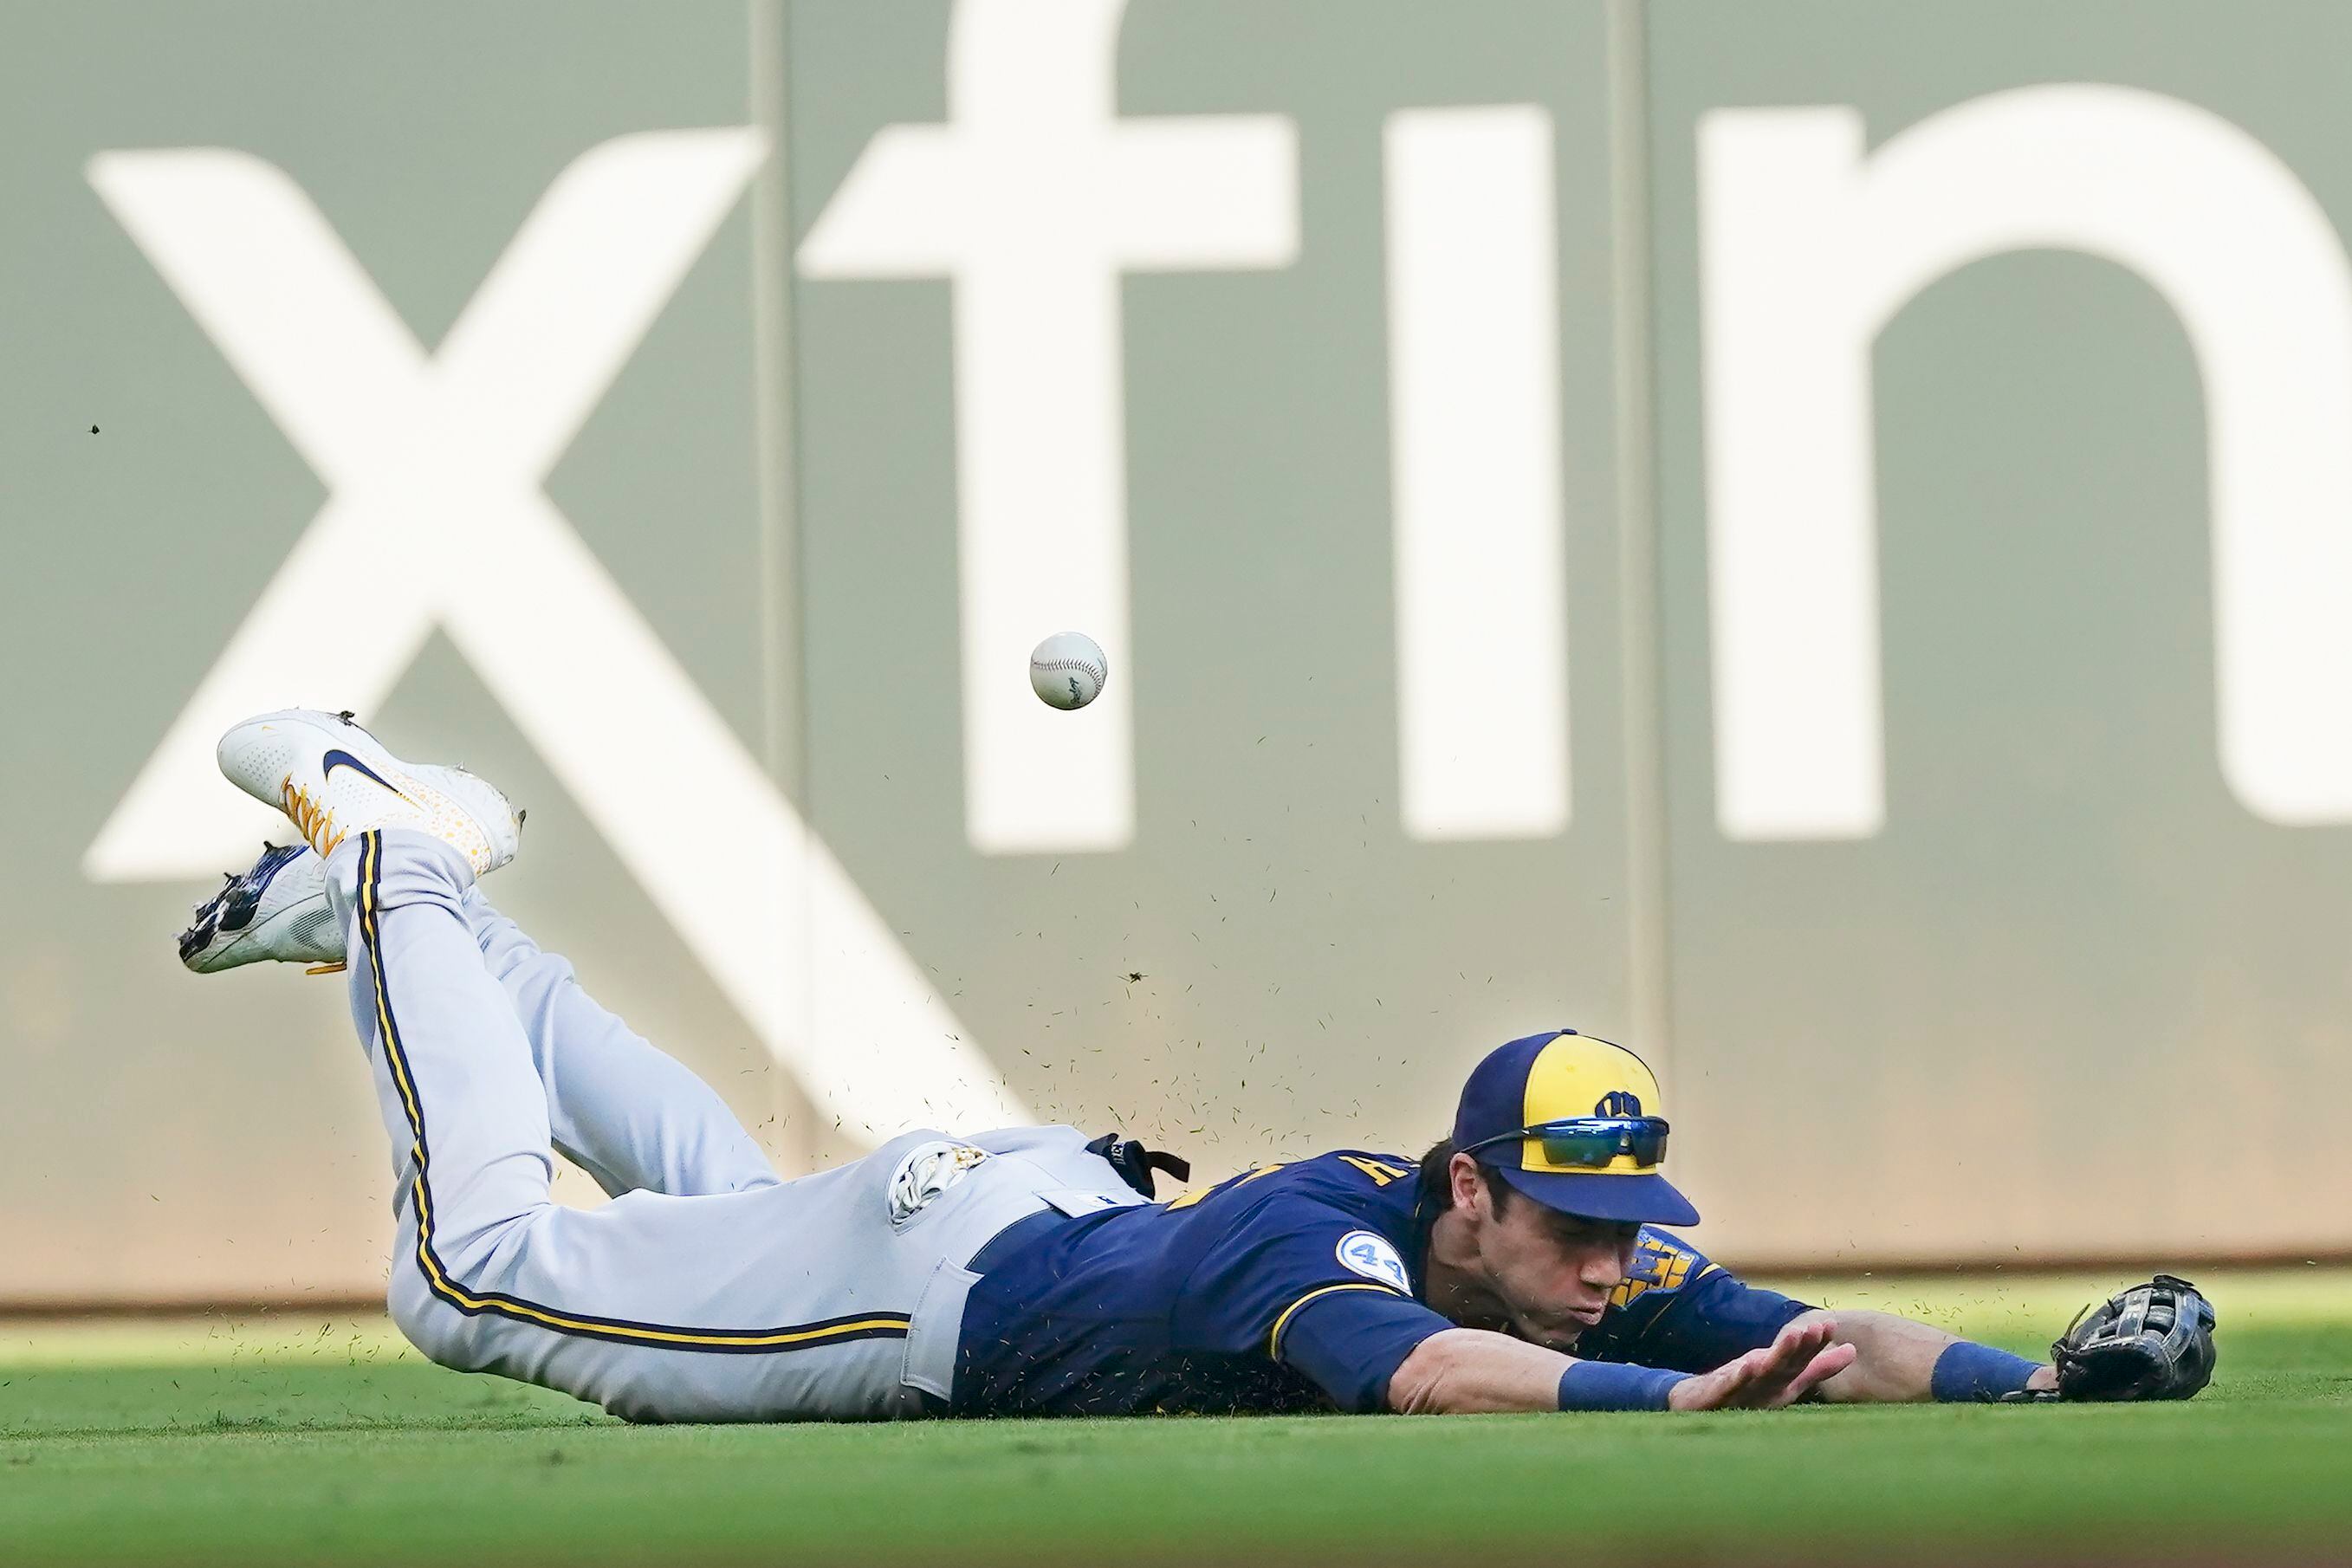 The 2019 season ended prematurely for Christian Yelich, but it was still an  historic one - Brew Crew Ball